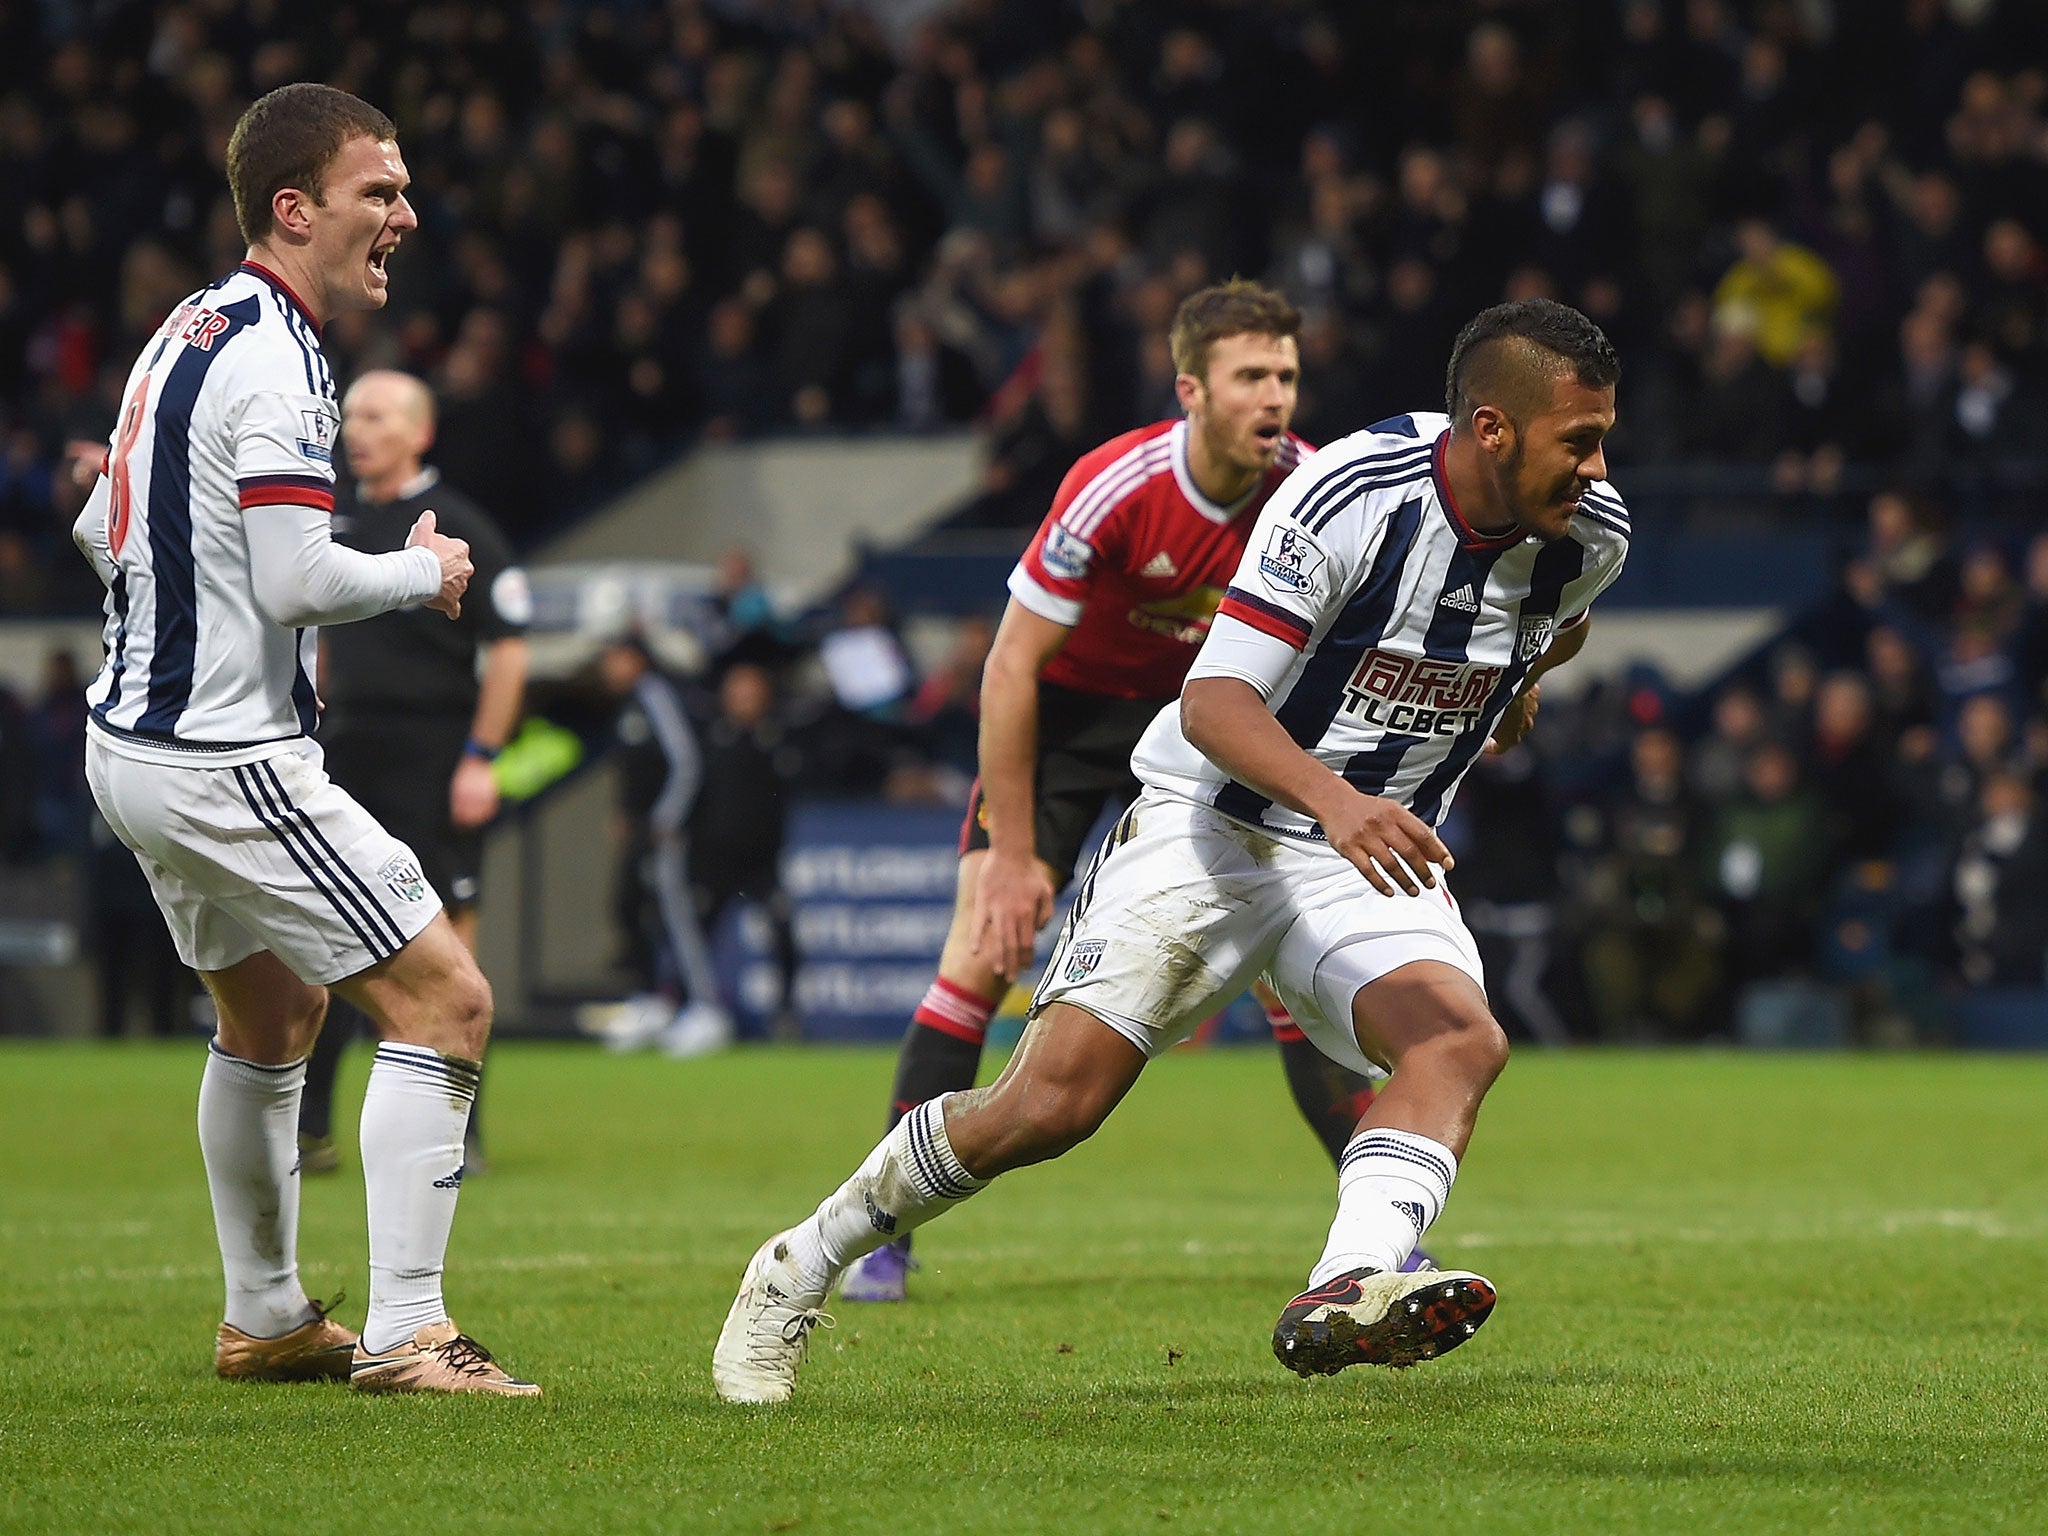 Salomon Rondon begins to celebrate after scoring the winning goal for West Brom